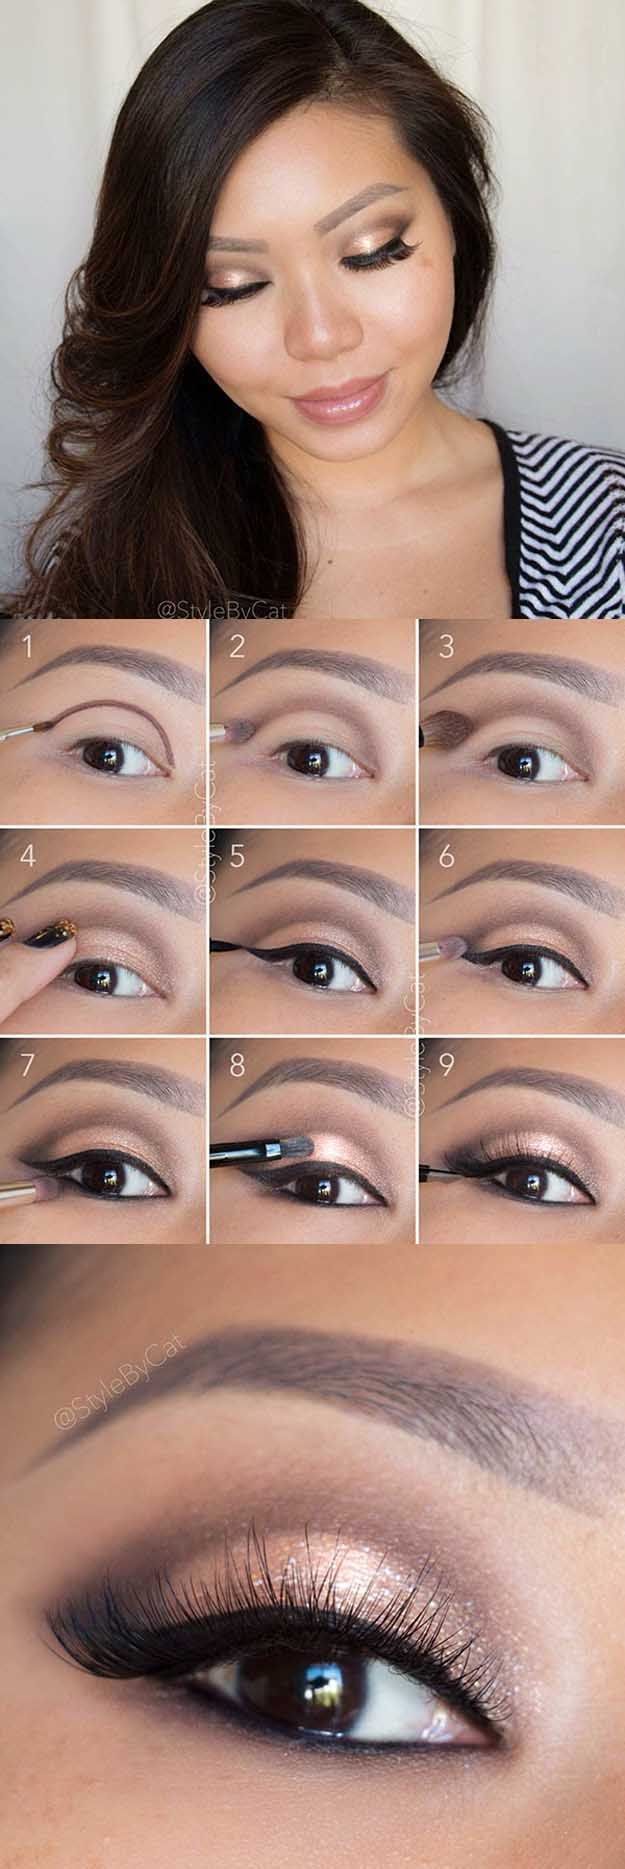 [ad_1]

Makeup Tips For Asian Women  Soft Rose Gold Smokey Eye Tutorial- Simple Step By
Source by nicolette15
[ad_2]
			
			…